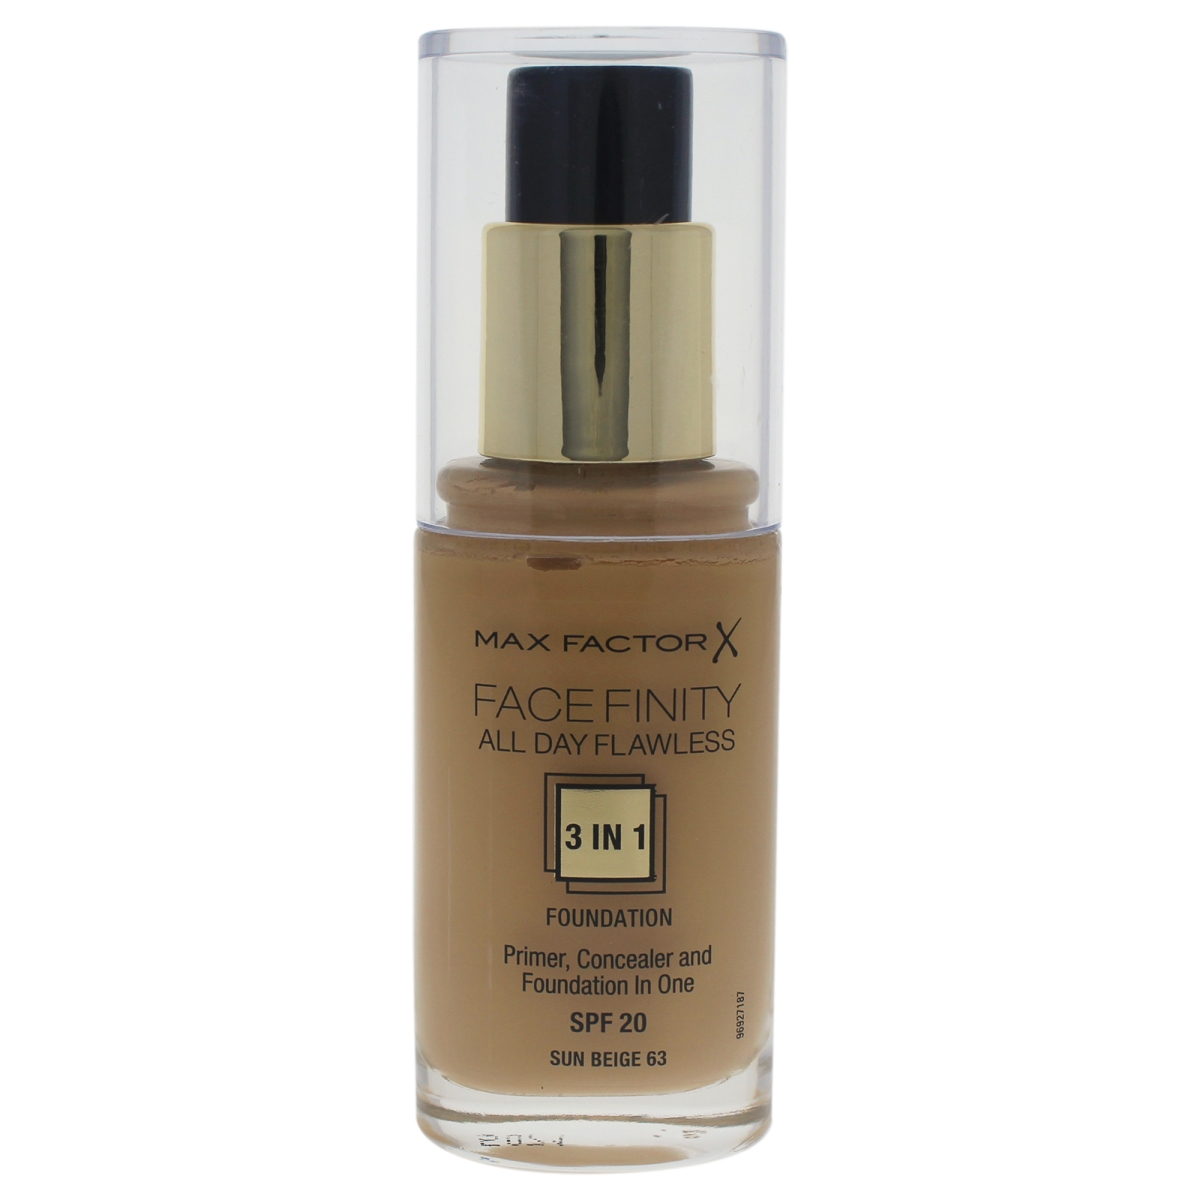 W-c-11238 30 Ml No. 63 Spf20 Facefinity All Day Flawless 3-in-1 Foundation - Sun Beige For Women